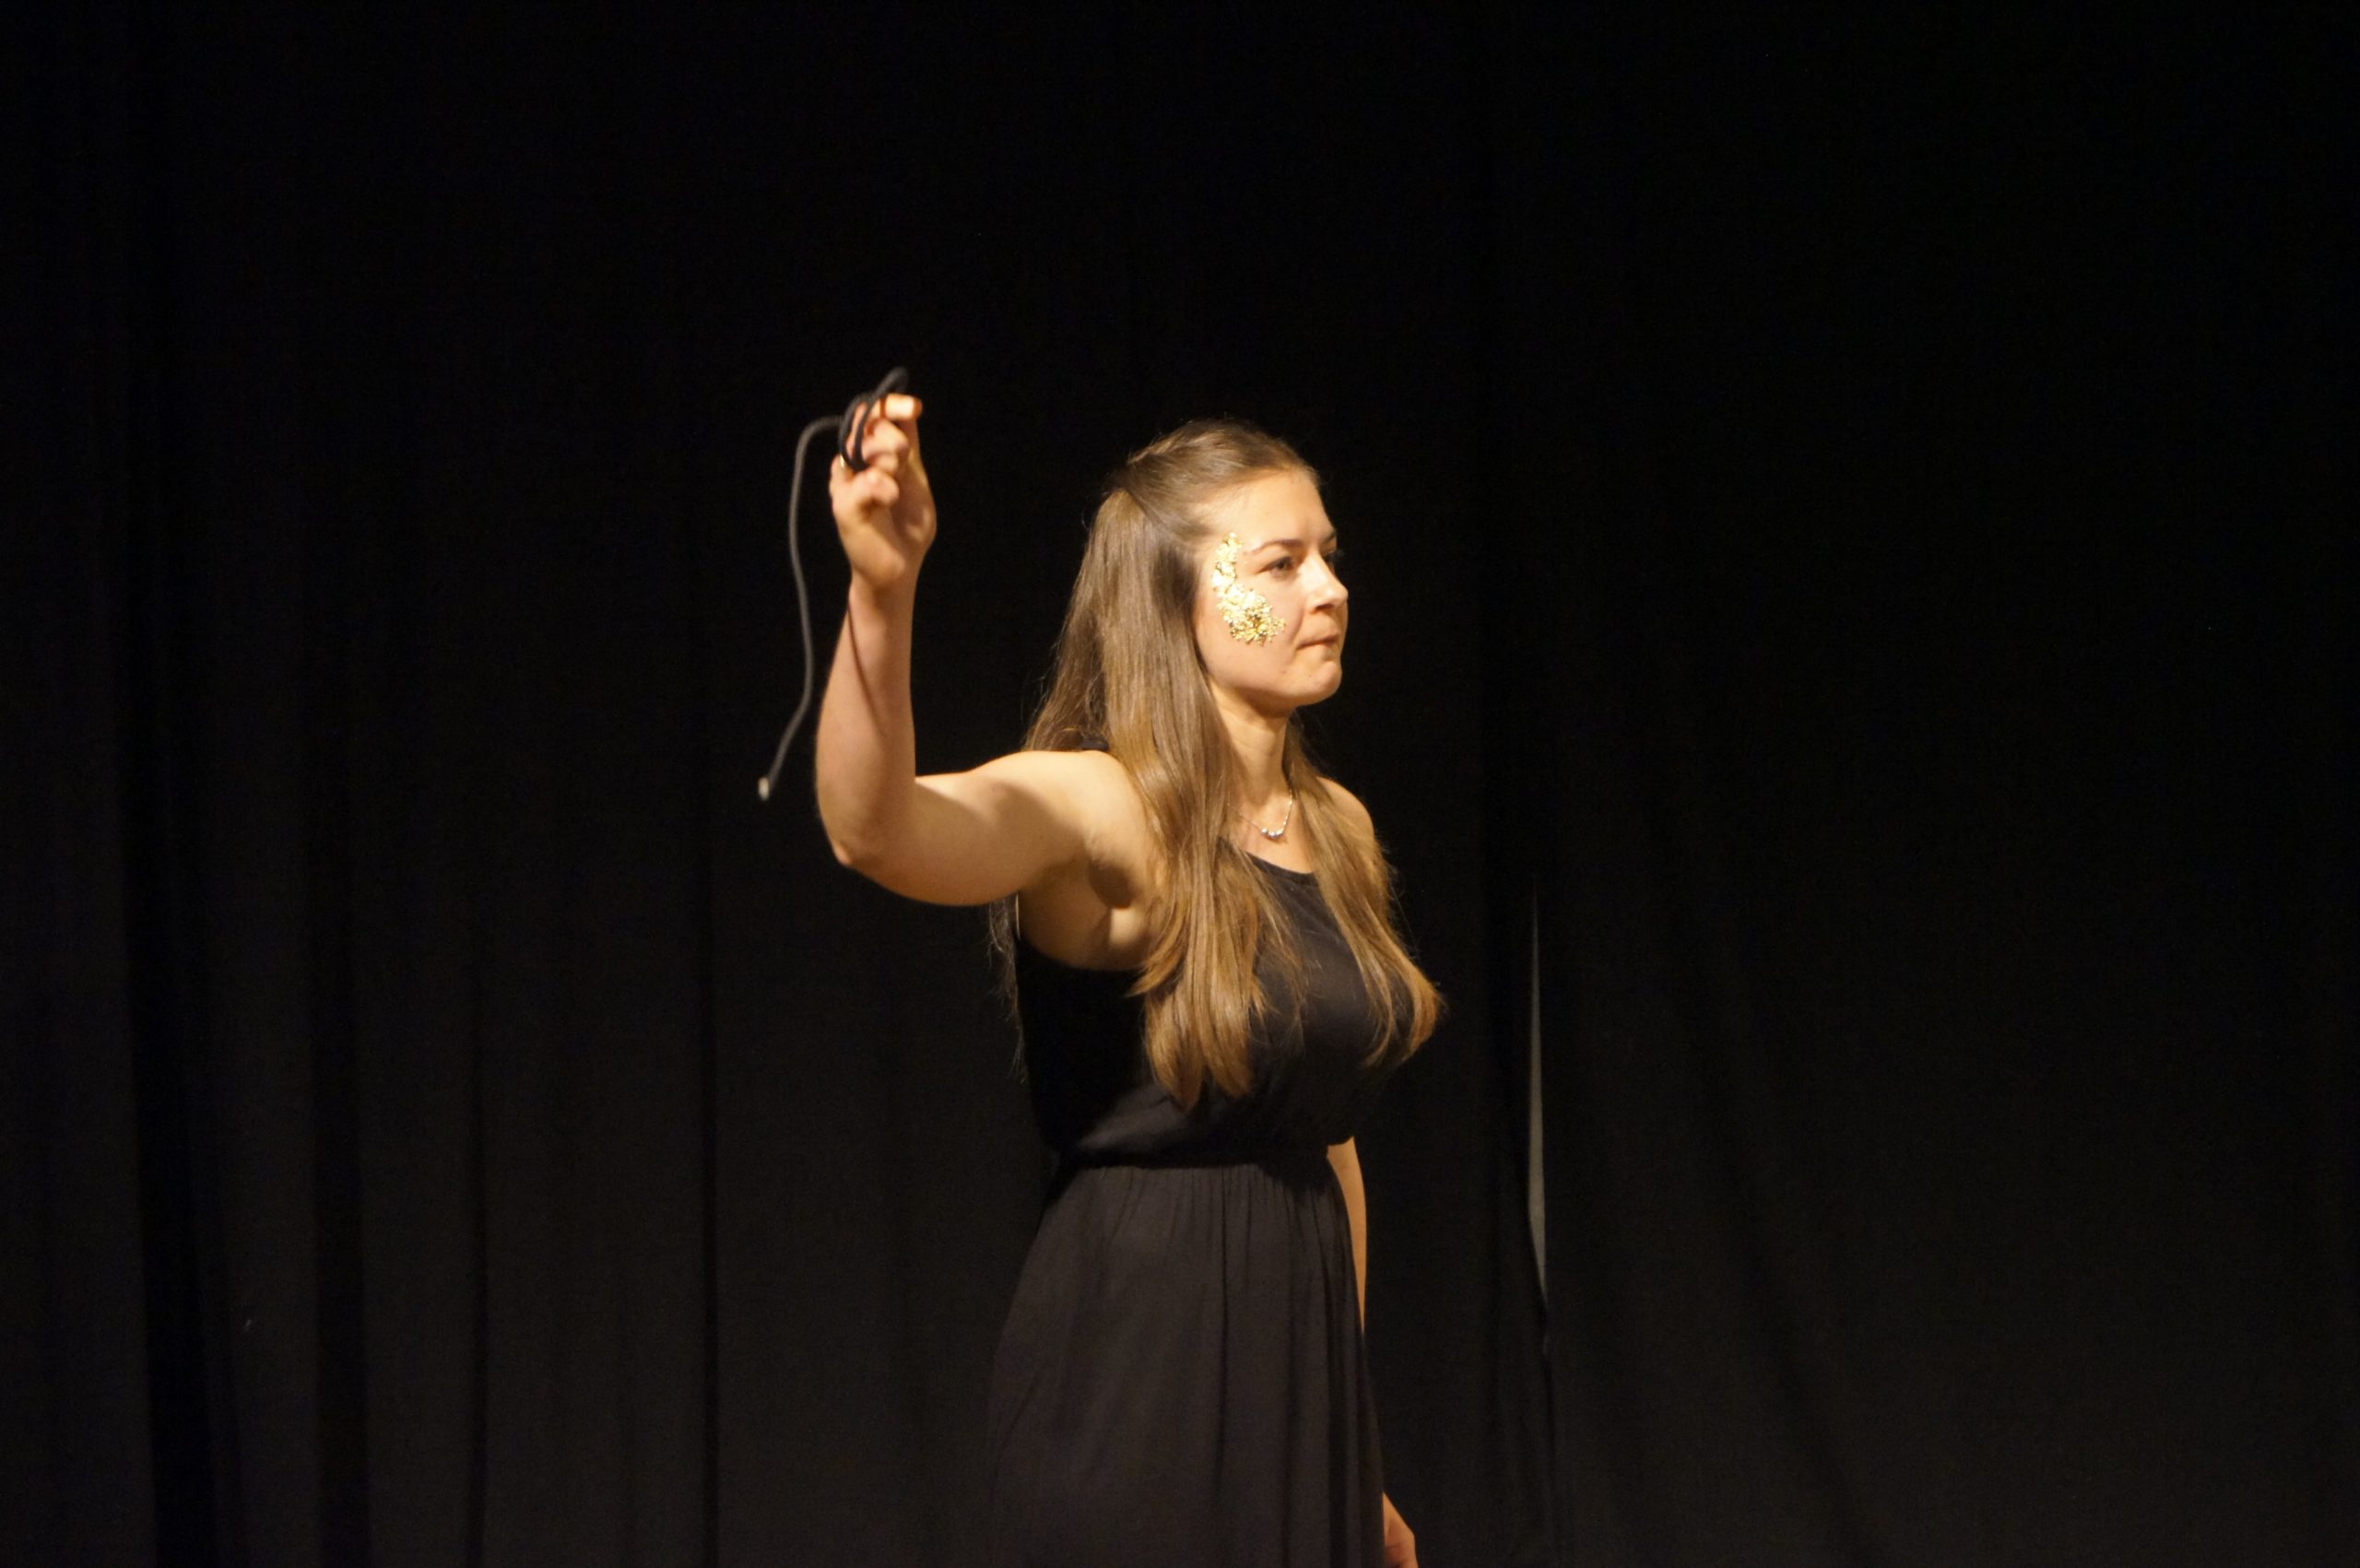 Theatre performance, woman on stage with a black dress, dark blonde hair, golden flakes on her right cheek, holding a string. Black curtain behind her. She looks angry